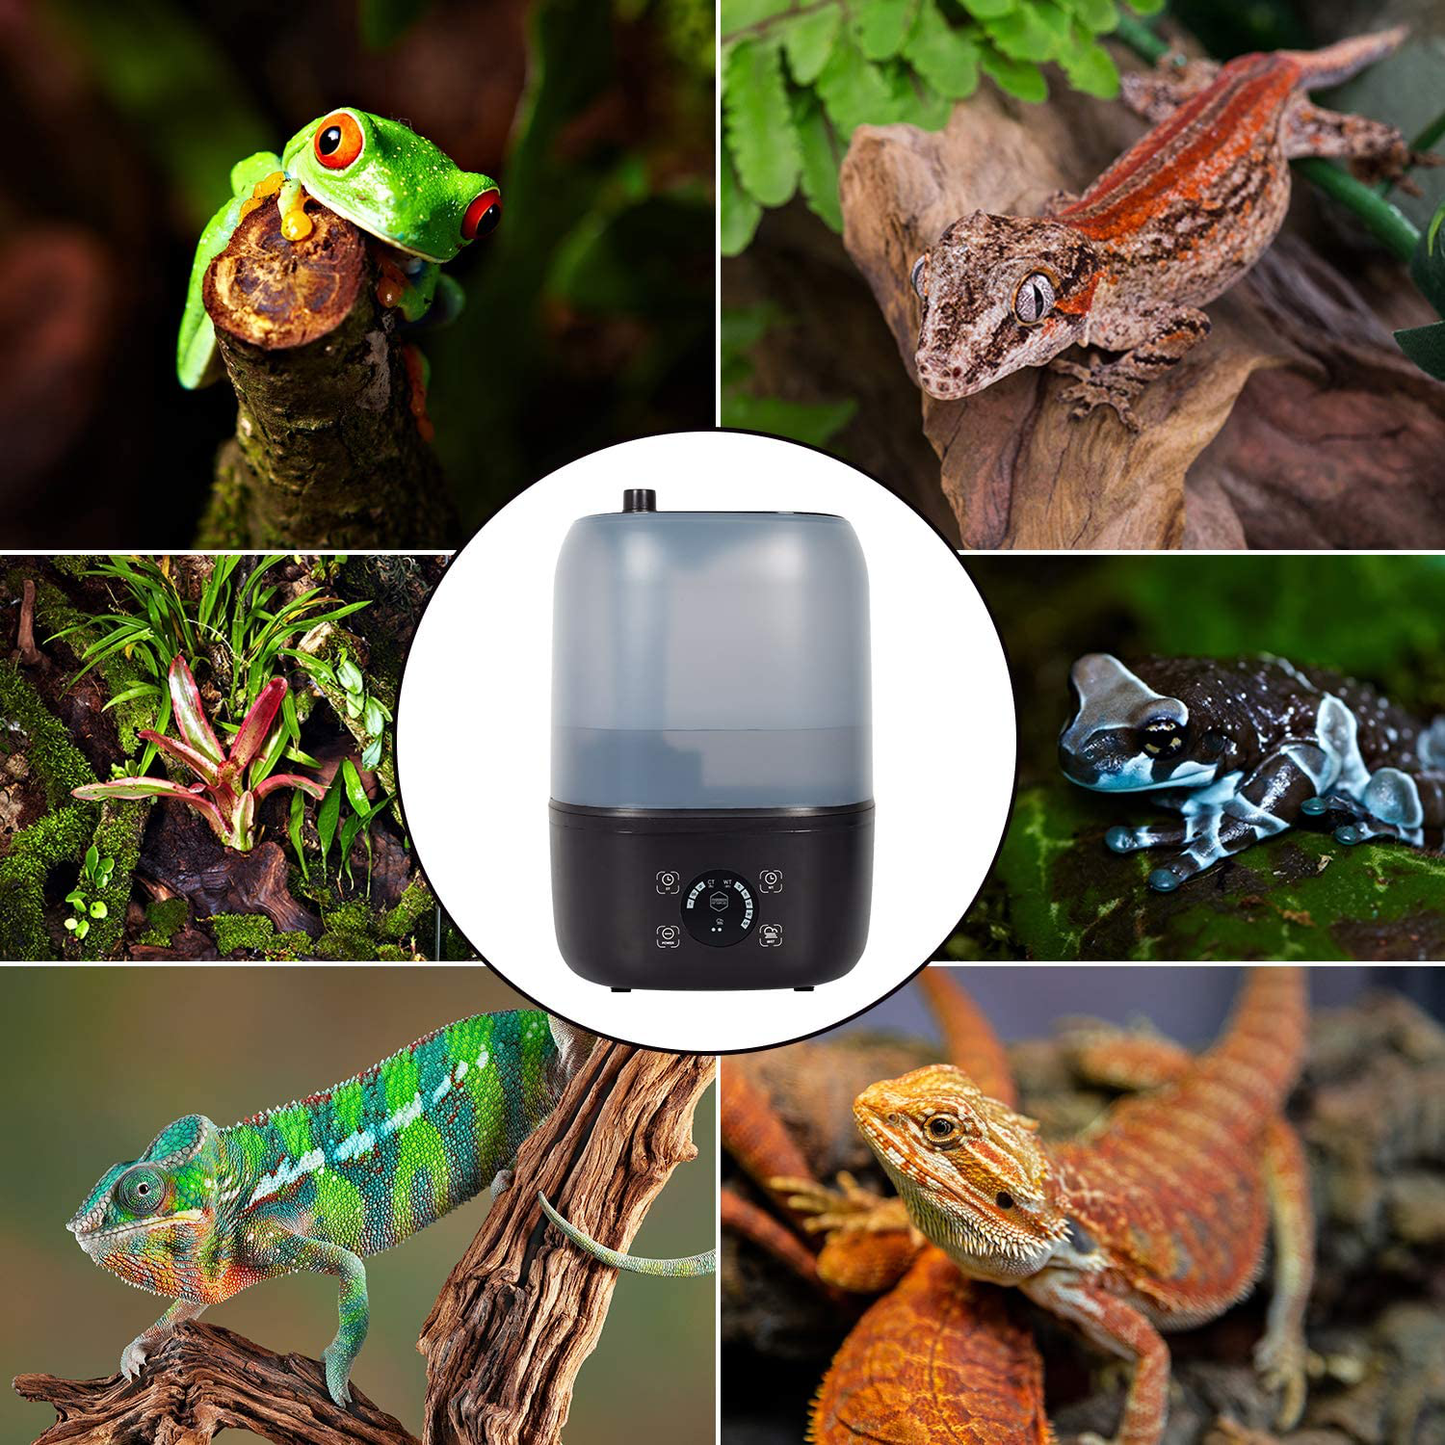 Reptile Humidifier/Fogger - 4L Tank - New Digital Timer - Add Water from Top! for Reptiles/Amphibians/Herps - Compatible with All Terrariums and Enclosures